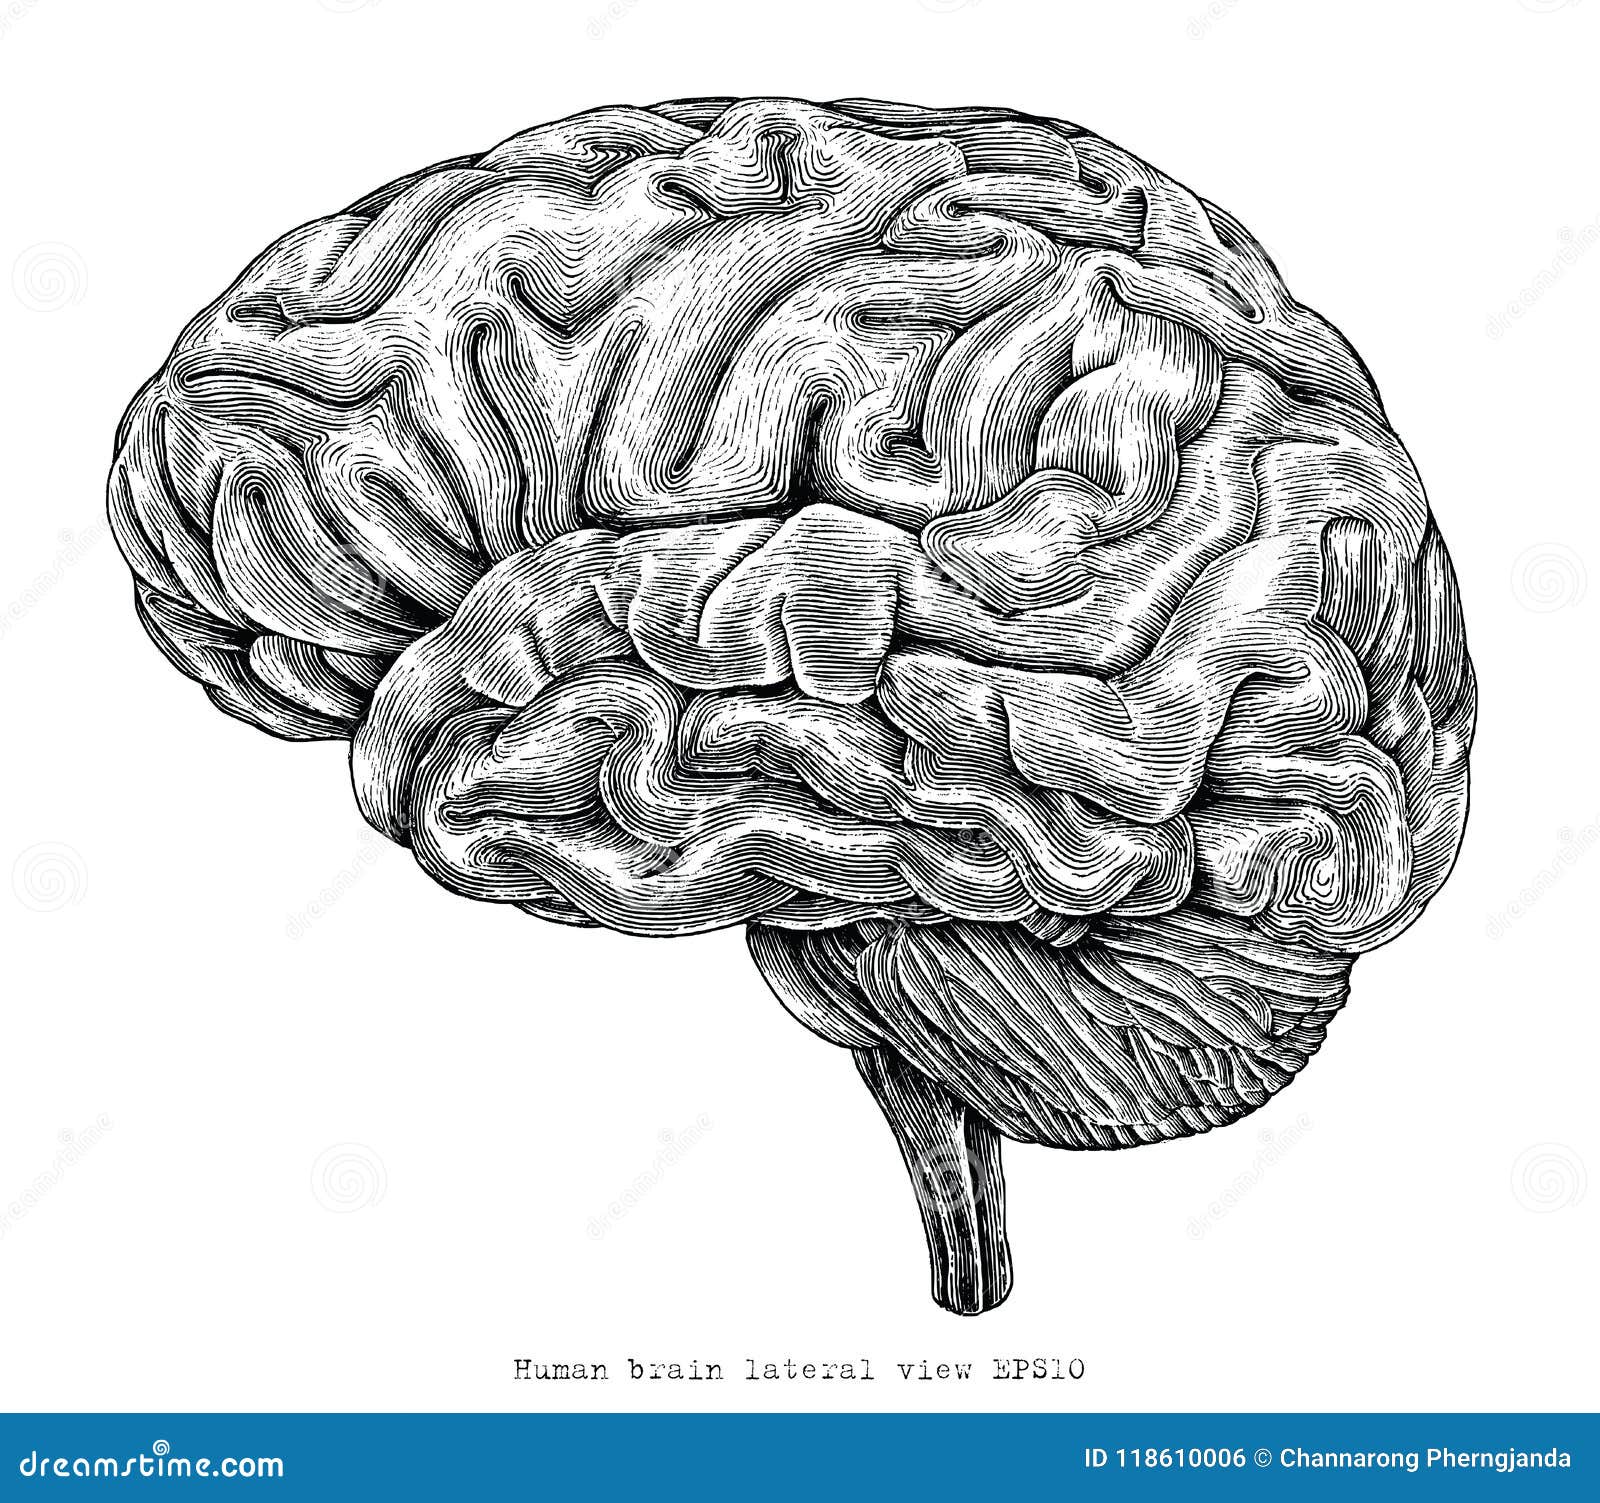 Recommendation Tips About How To Draw A Human Brain - Backgroundmetal